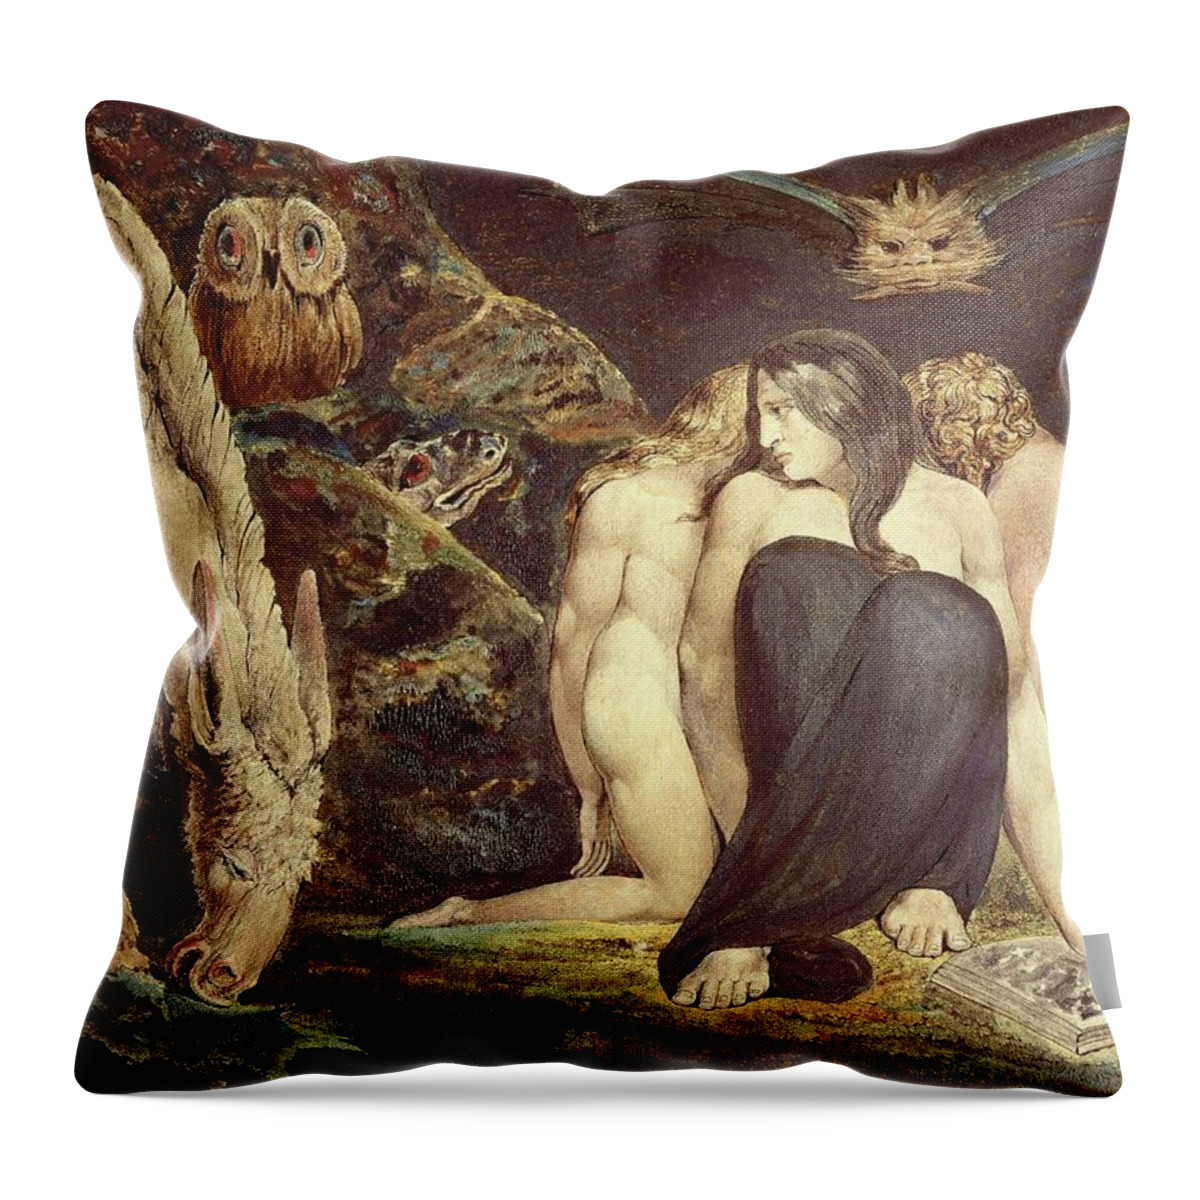 William Blake Throw Pillow featuring the painting Hecate. 43.8 x 58.1 cm -ca. 1795- Cat. N 5056. by William Blake -1757-1827-